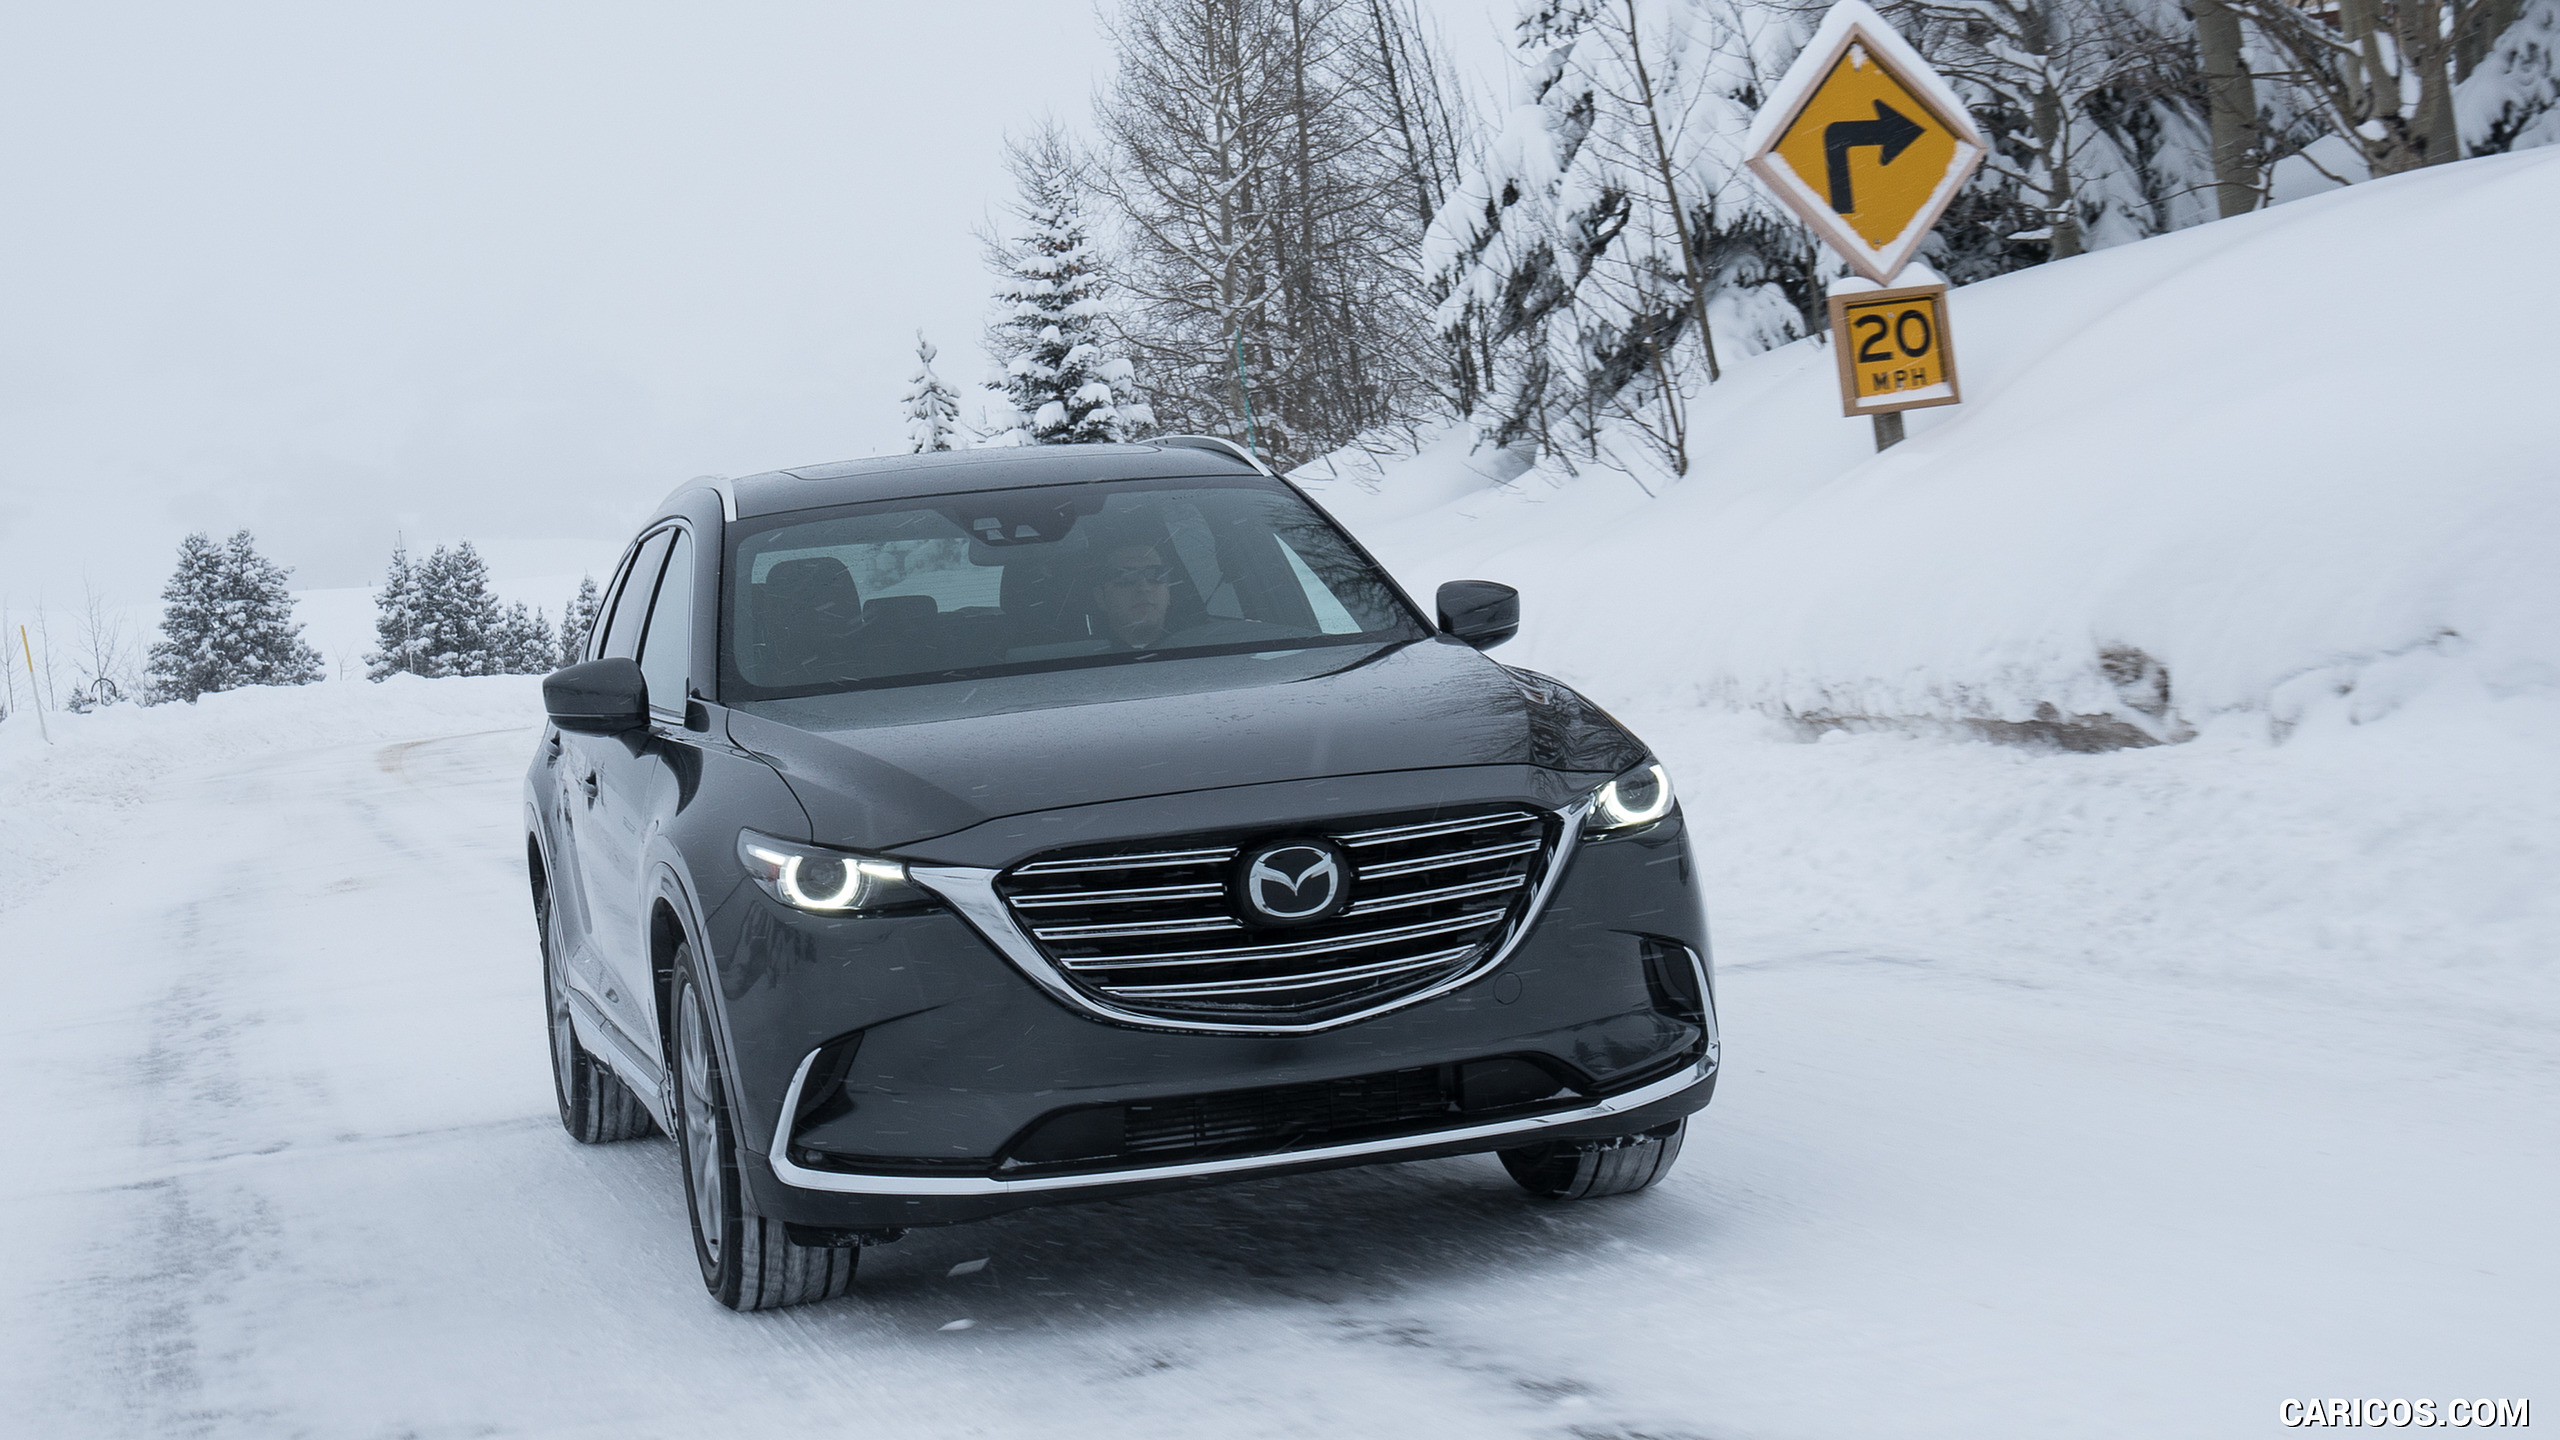 2016 Mazda CX-9 in Snow - Front, #62 of 69